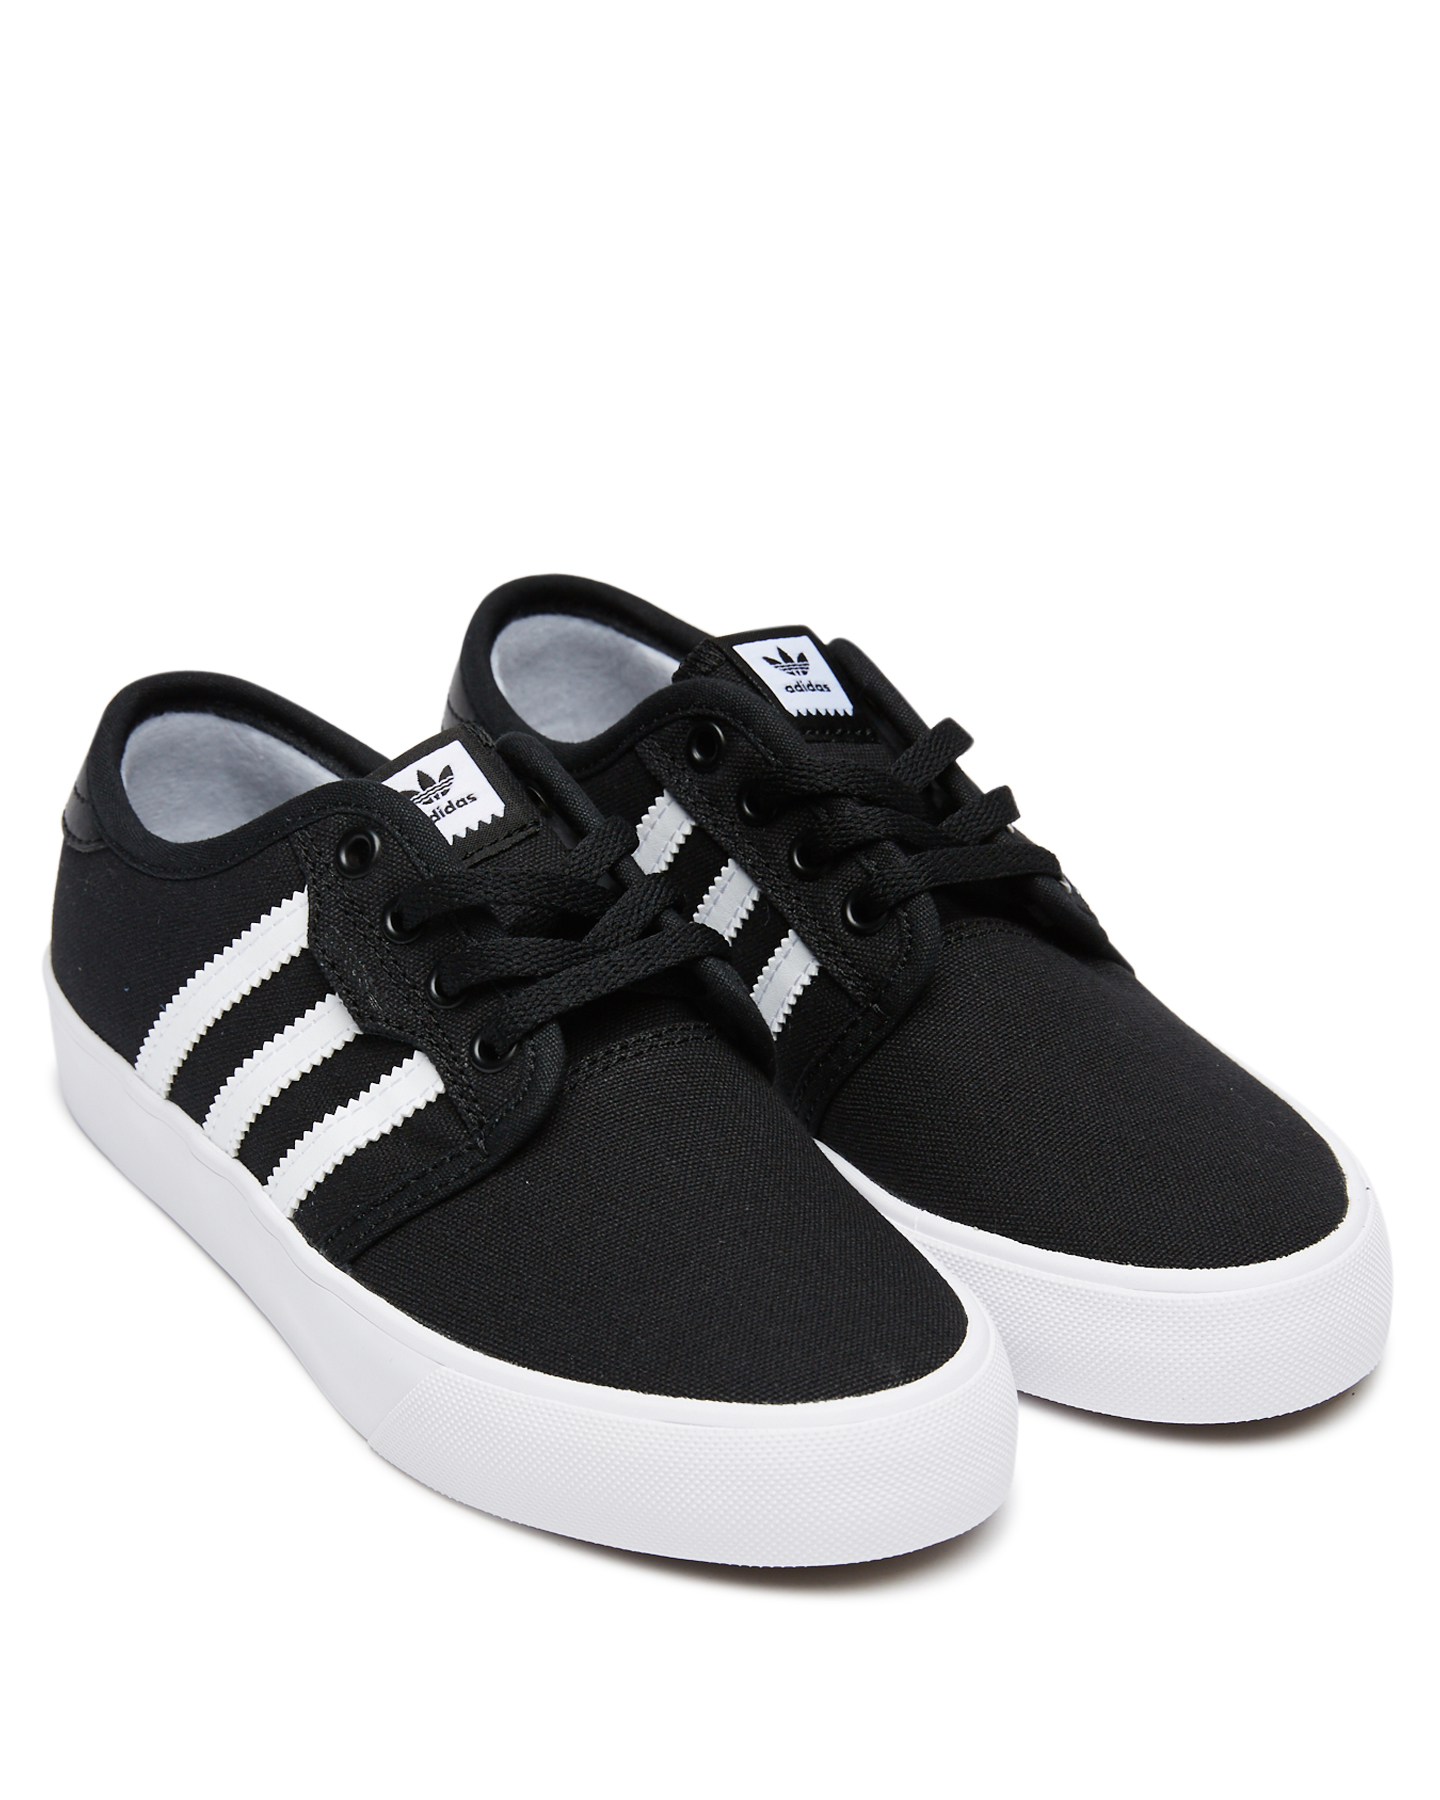 adidas seeley black and white